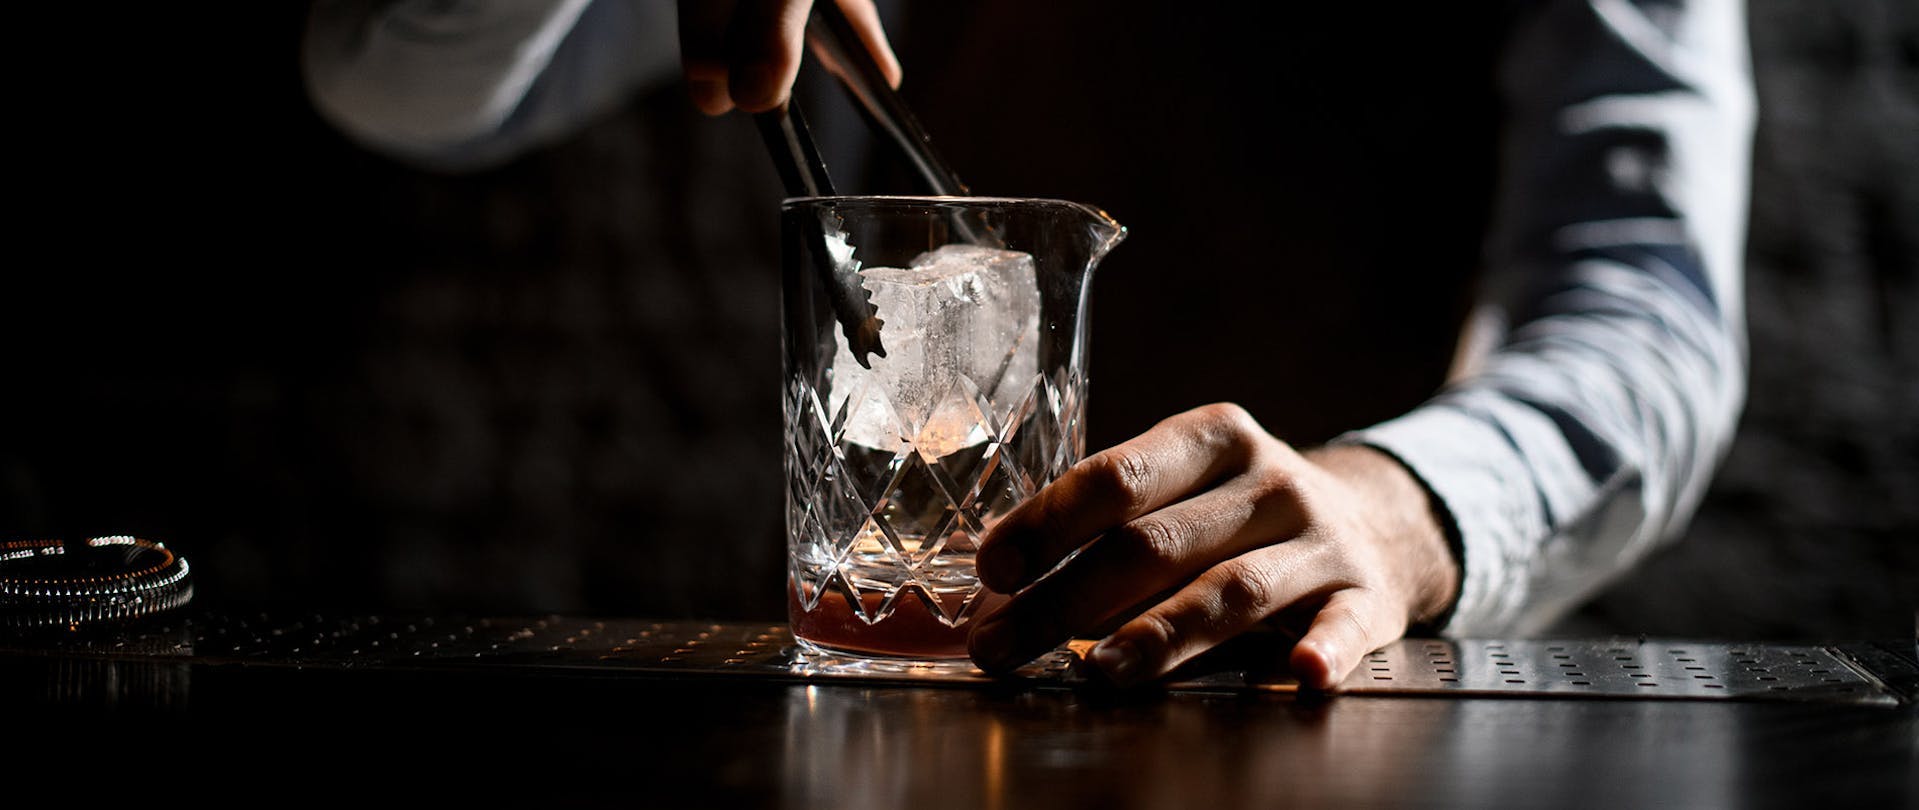 How to Make the Ideal Ice for Cocktails at Home